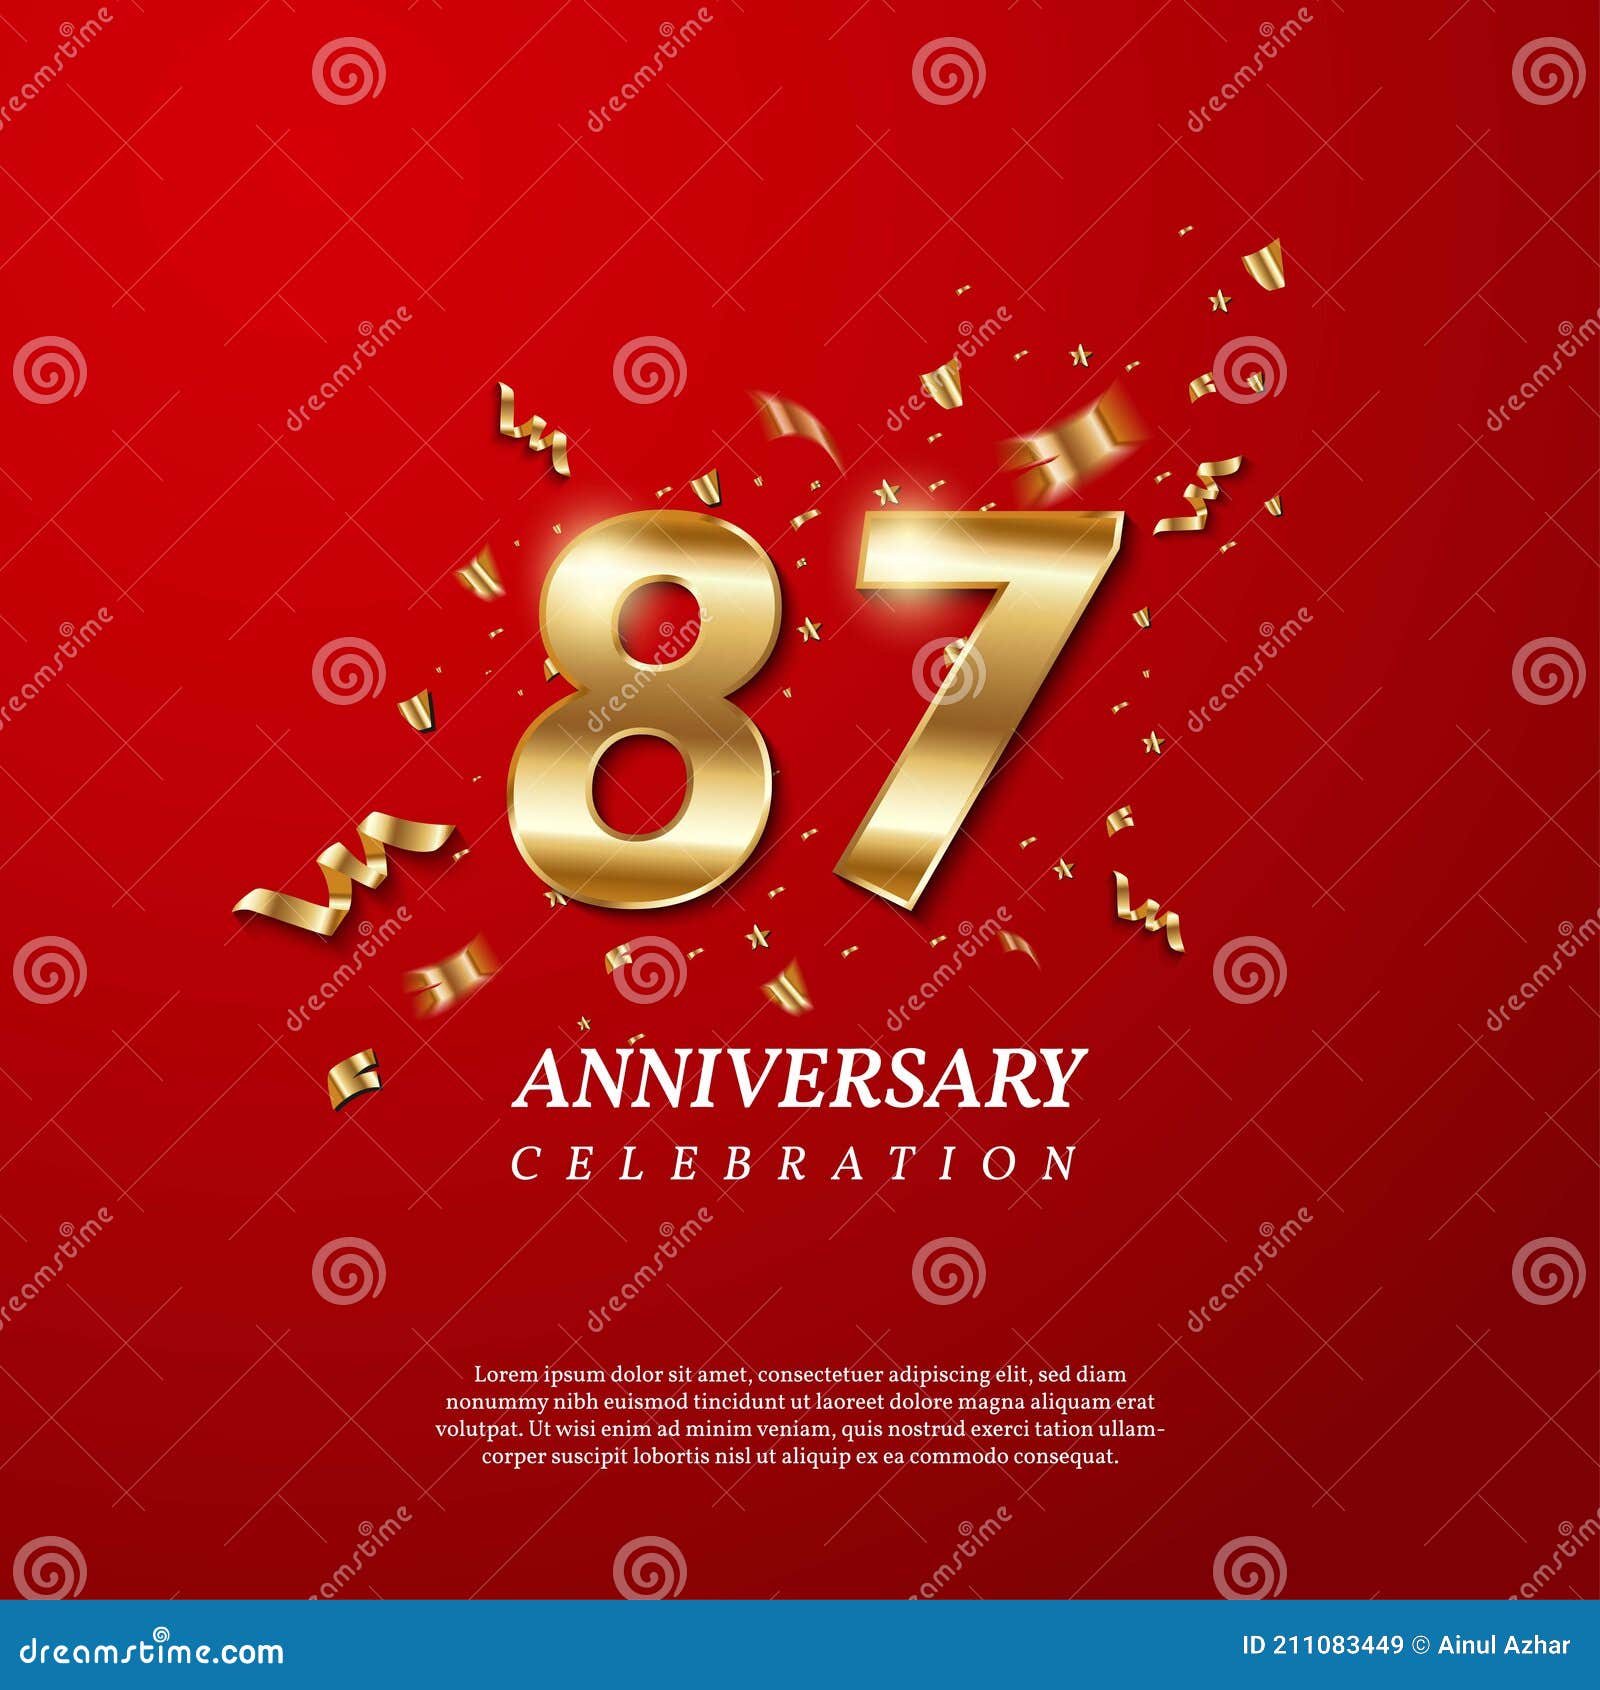 87th Anniversary Celebration. Golden Number 87 Stock Vector ...